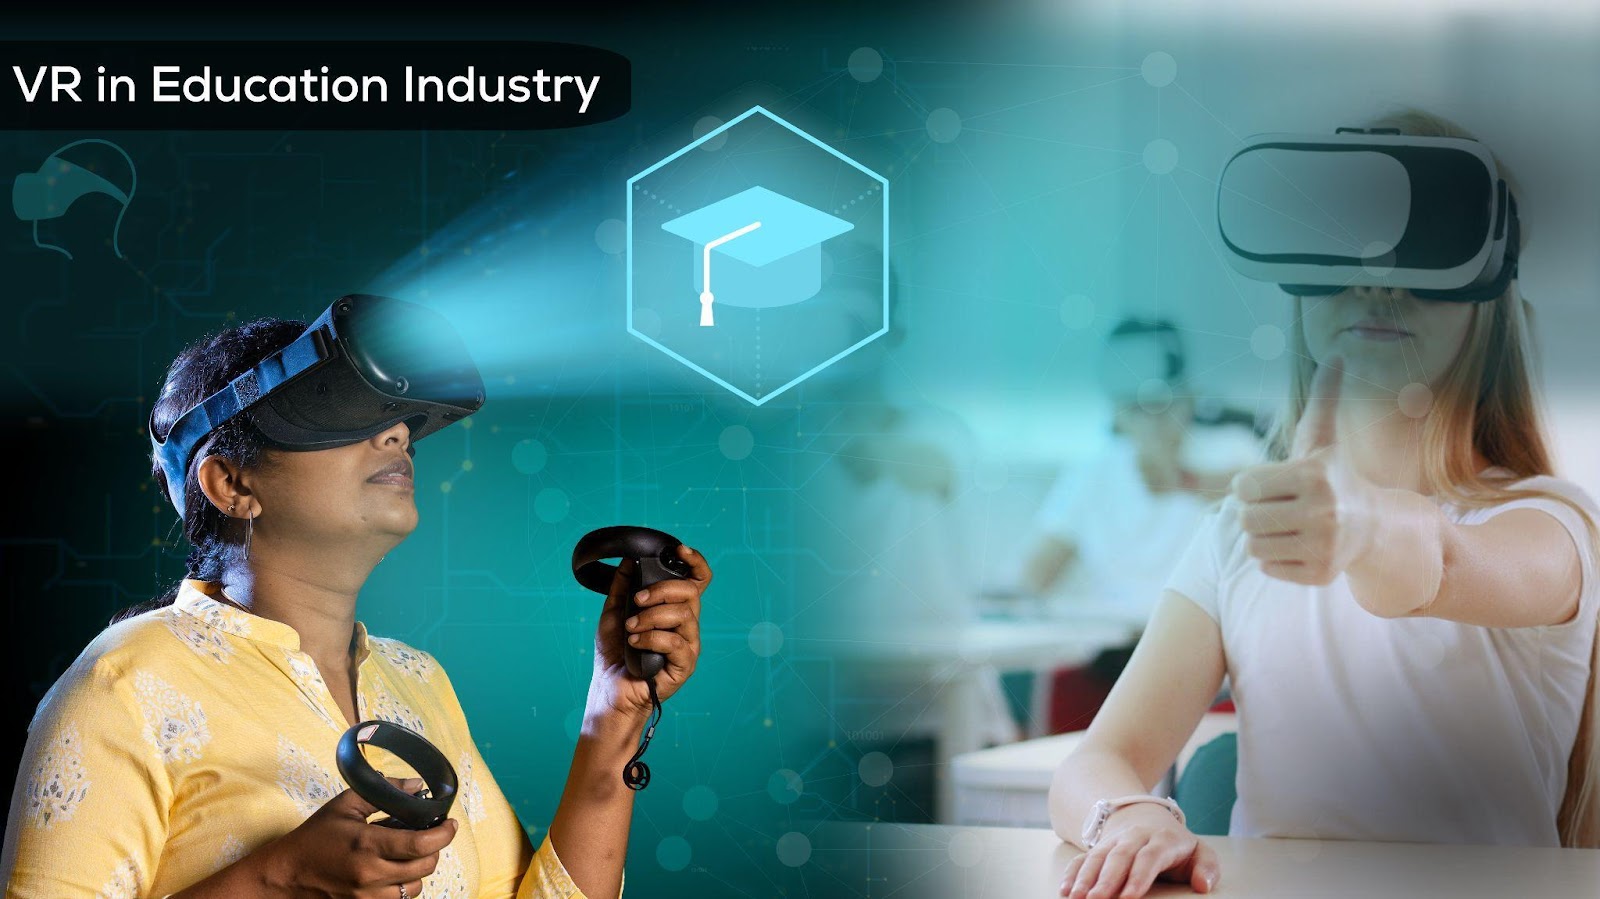 Applications of VR in the Education Industry